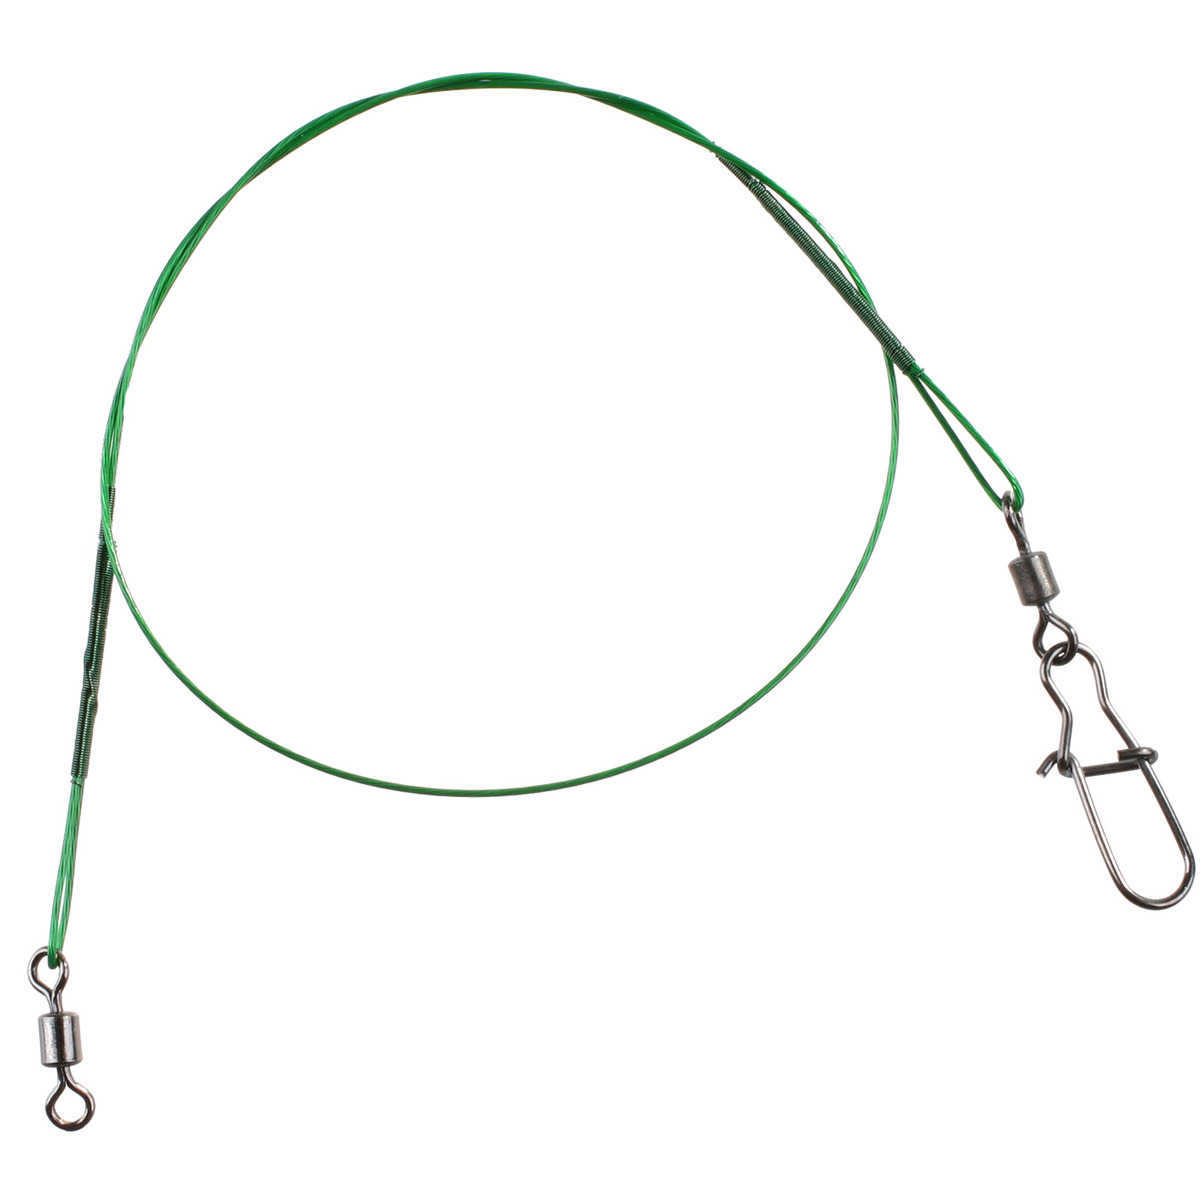 Mikado Steel Leaderwith Swivel And Double Treble Hook - 25 cm / 15kg  GREEN